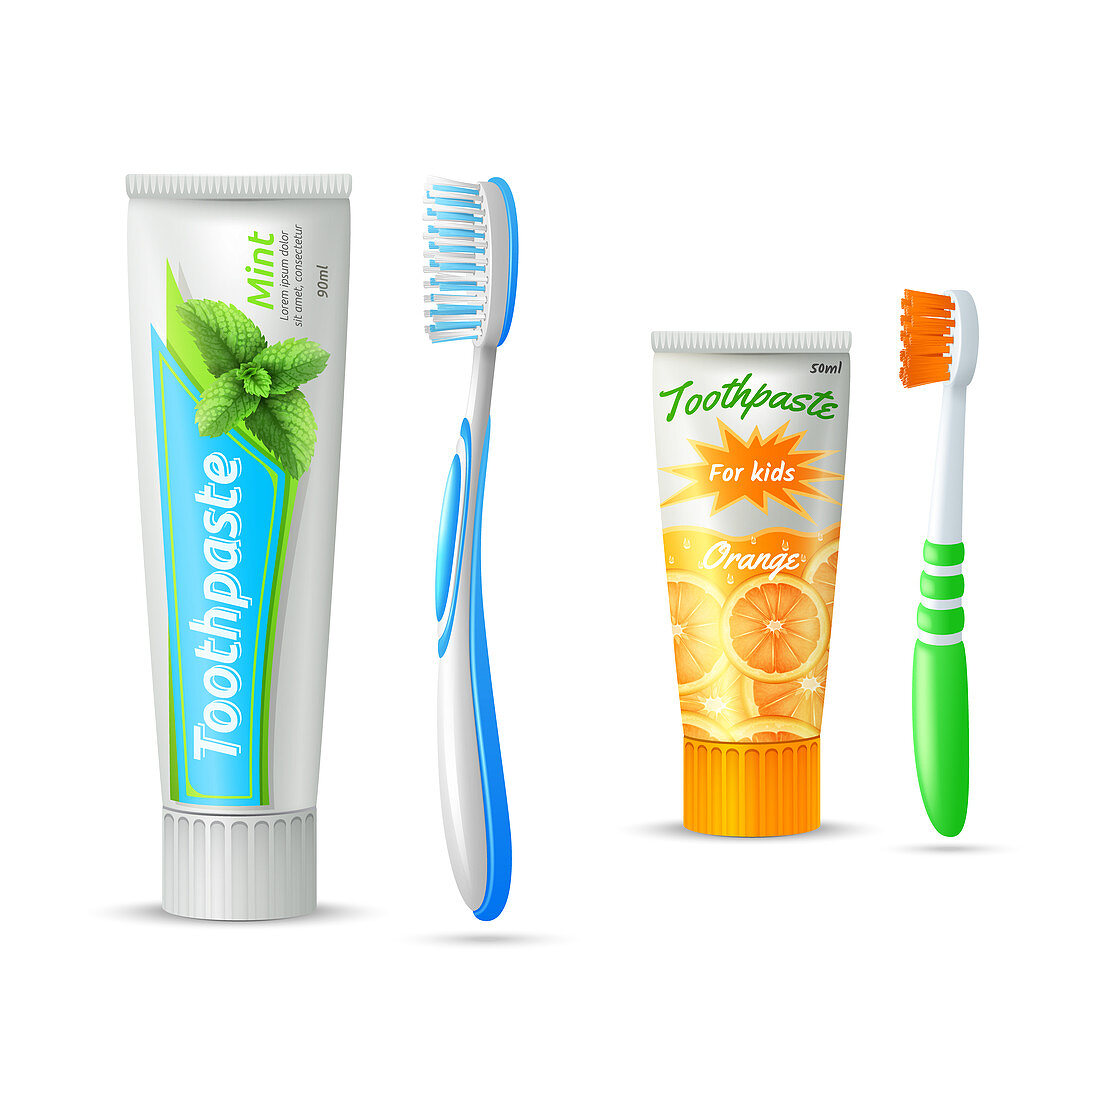 Toothbrush and toothpaste, illustration